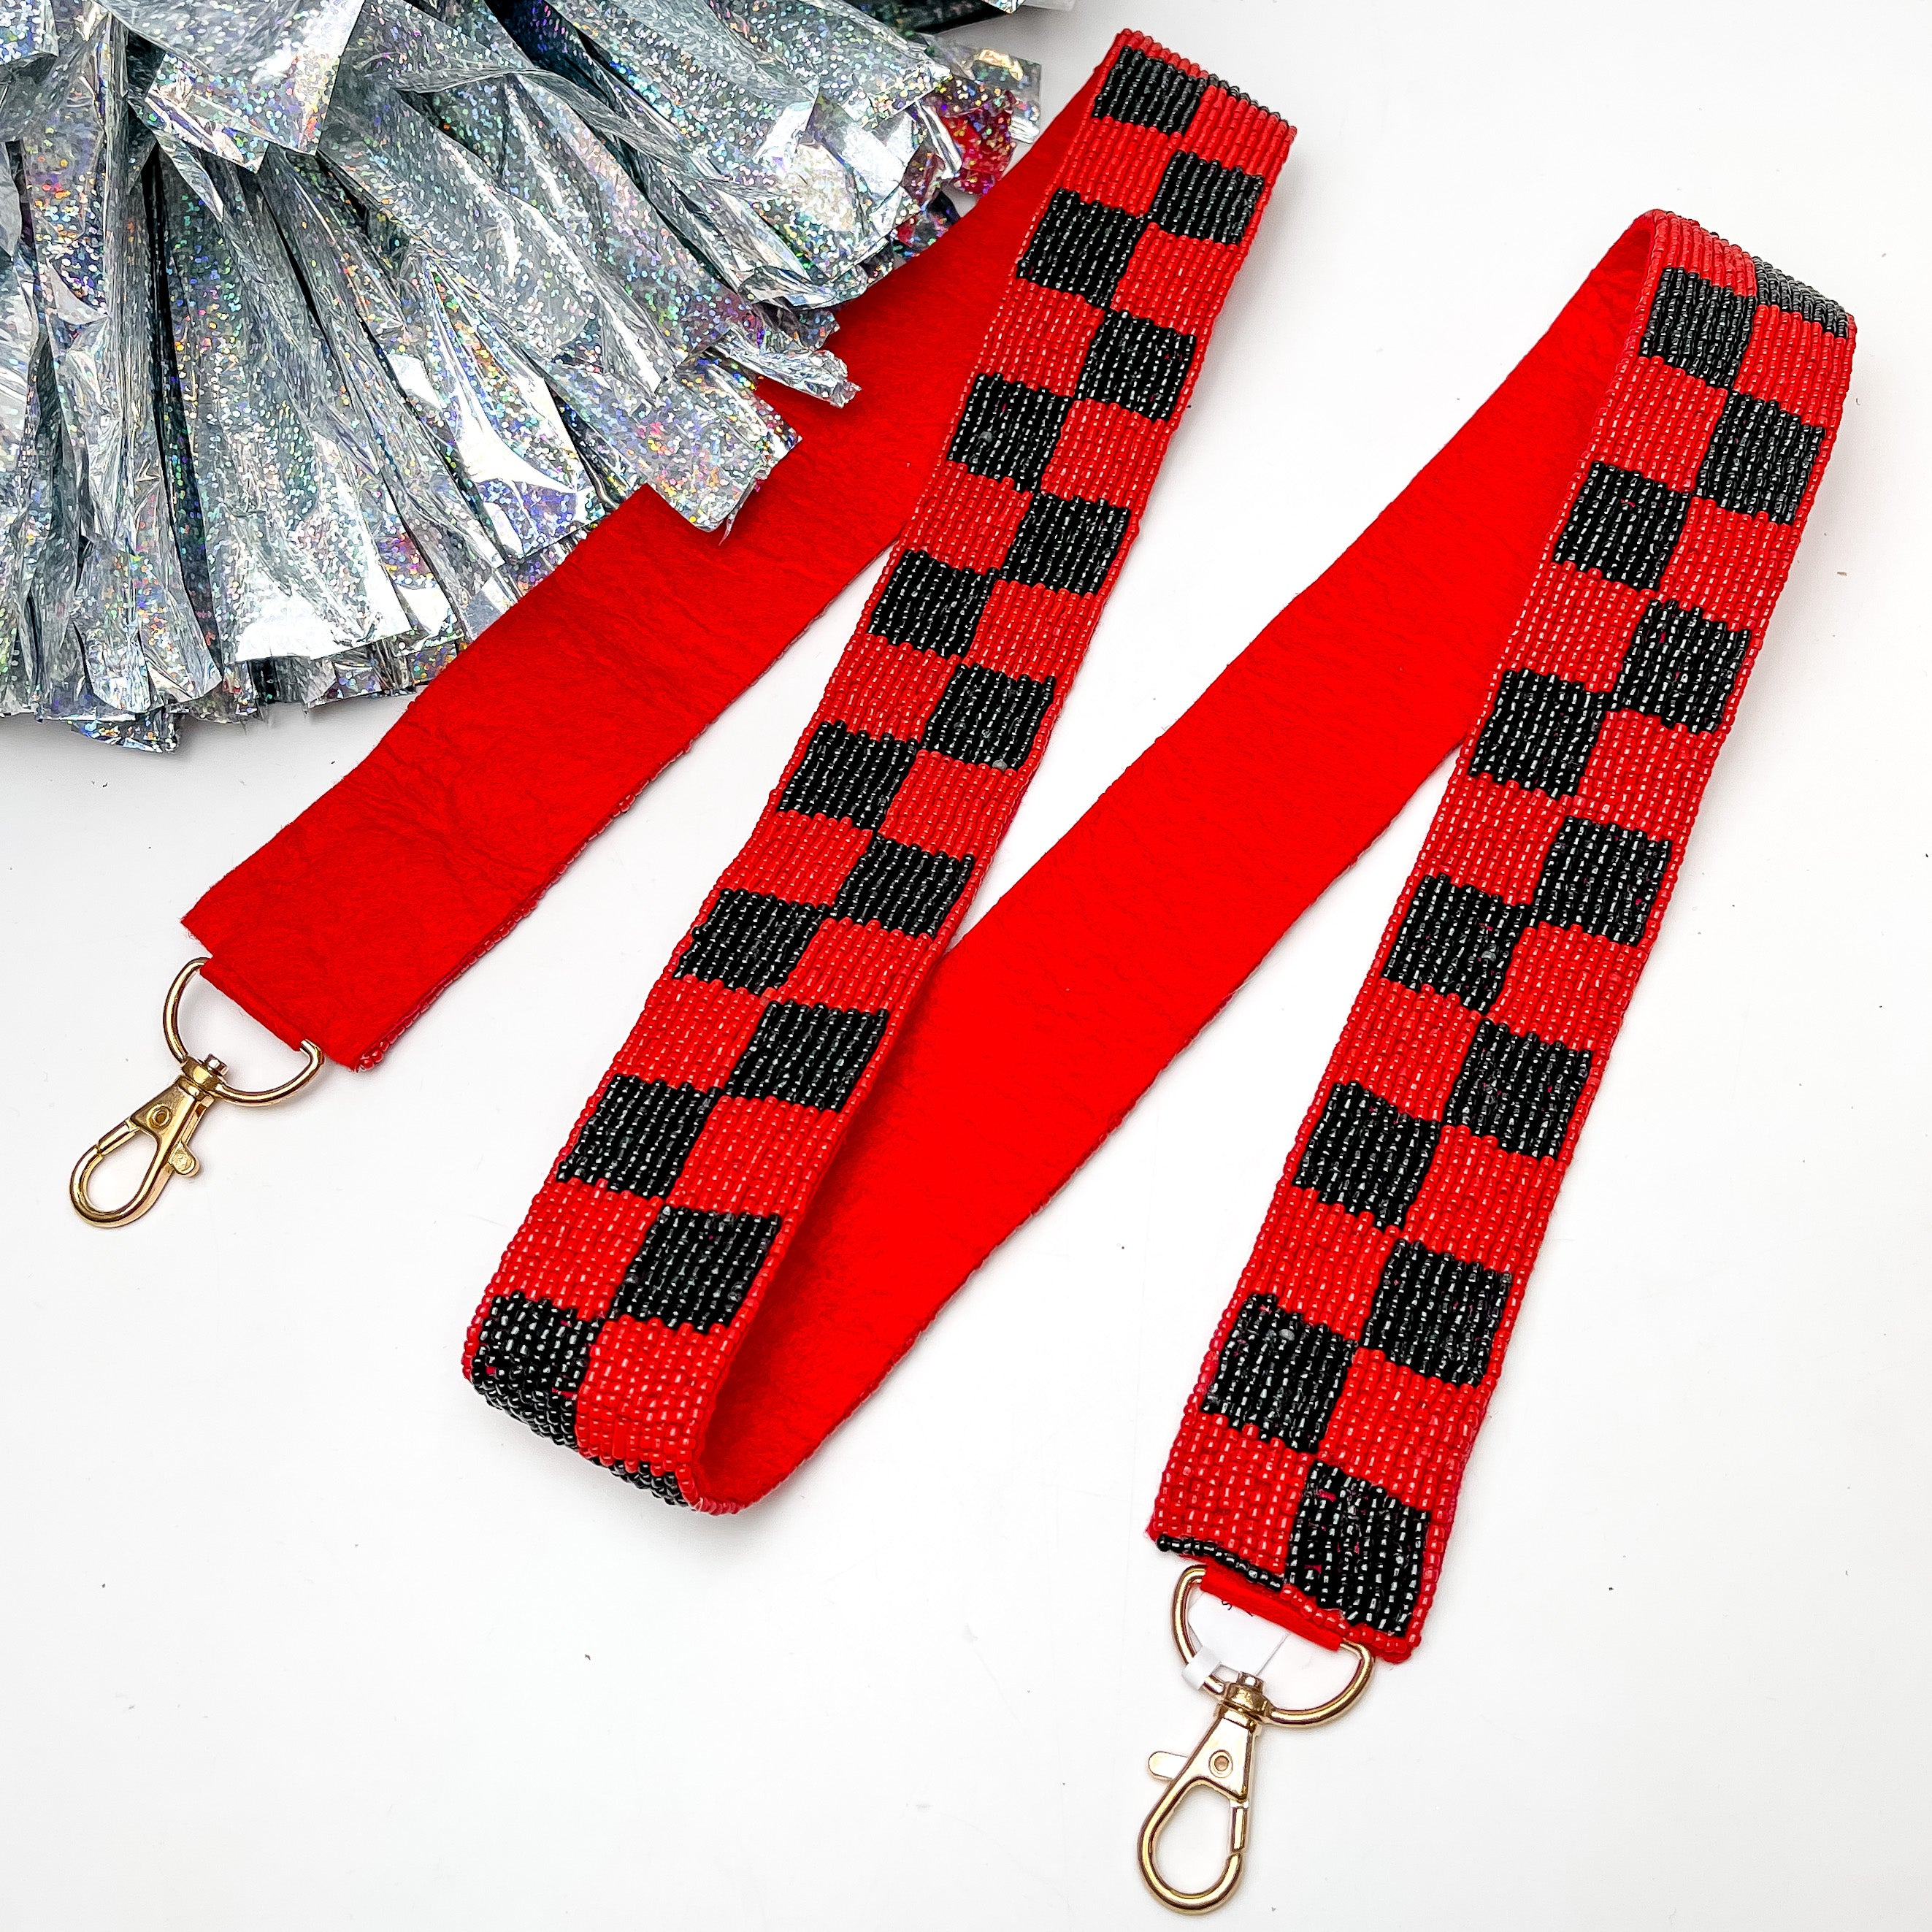 Game Day! Checkered Beaded Purse Strap in Red and Black. This purse strap is pictured on a white background with a silver pom pom next to it.